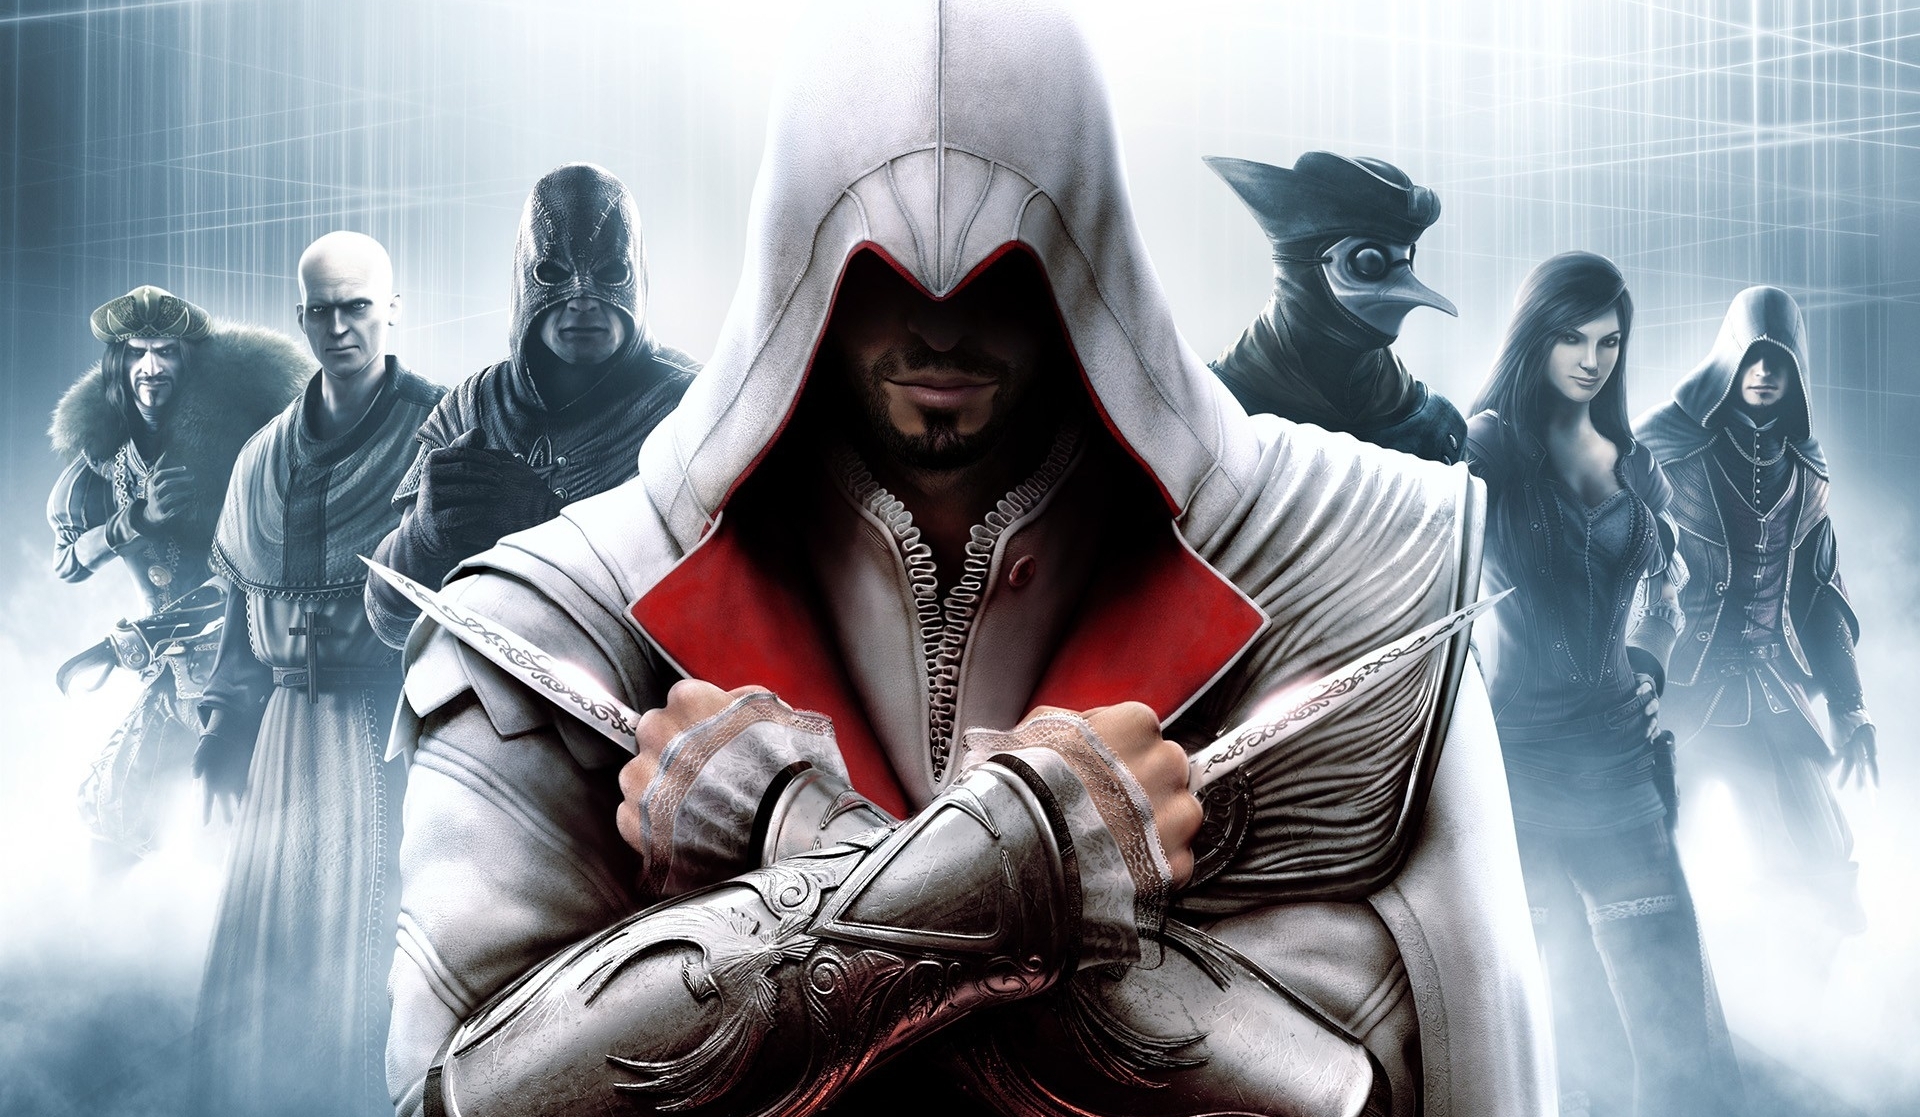 Next Assassin's Creed set in Egypt, coming 2017